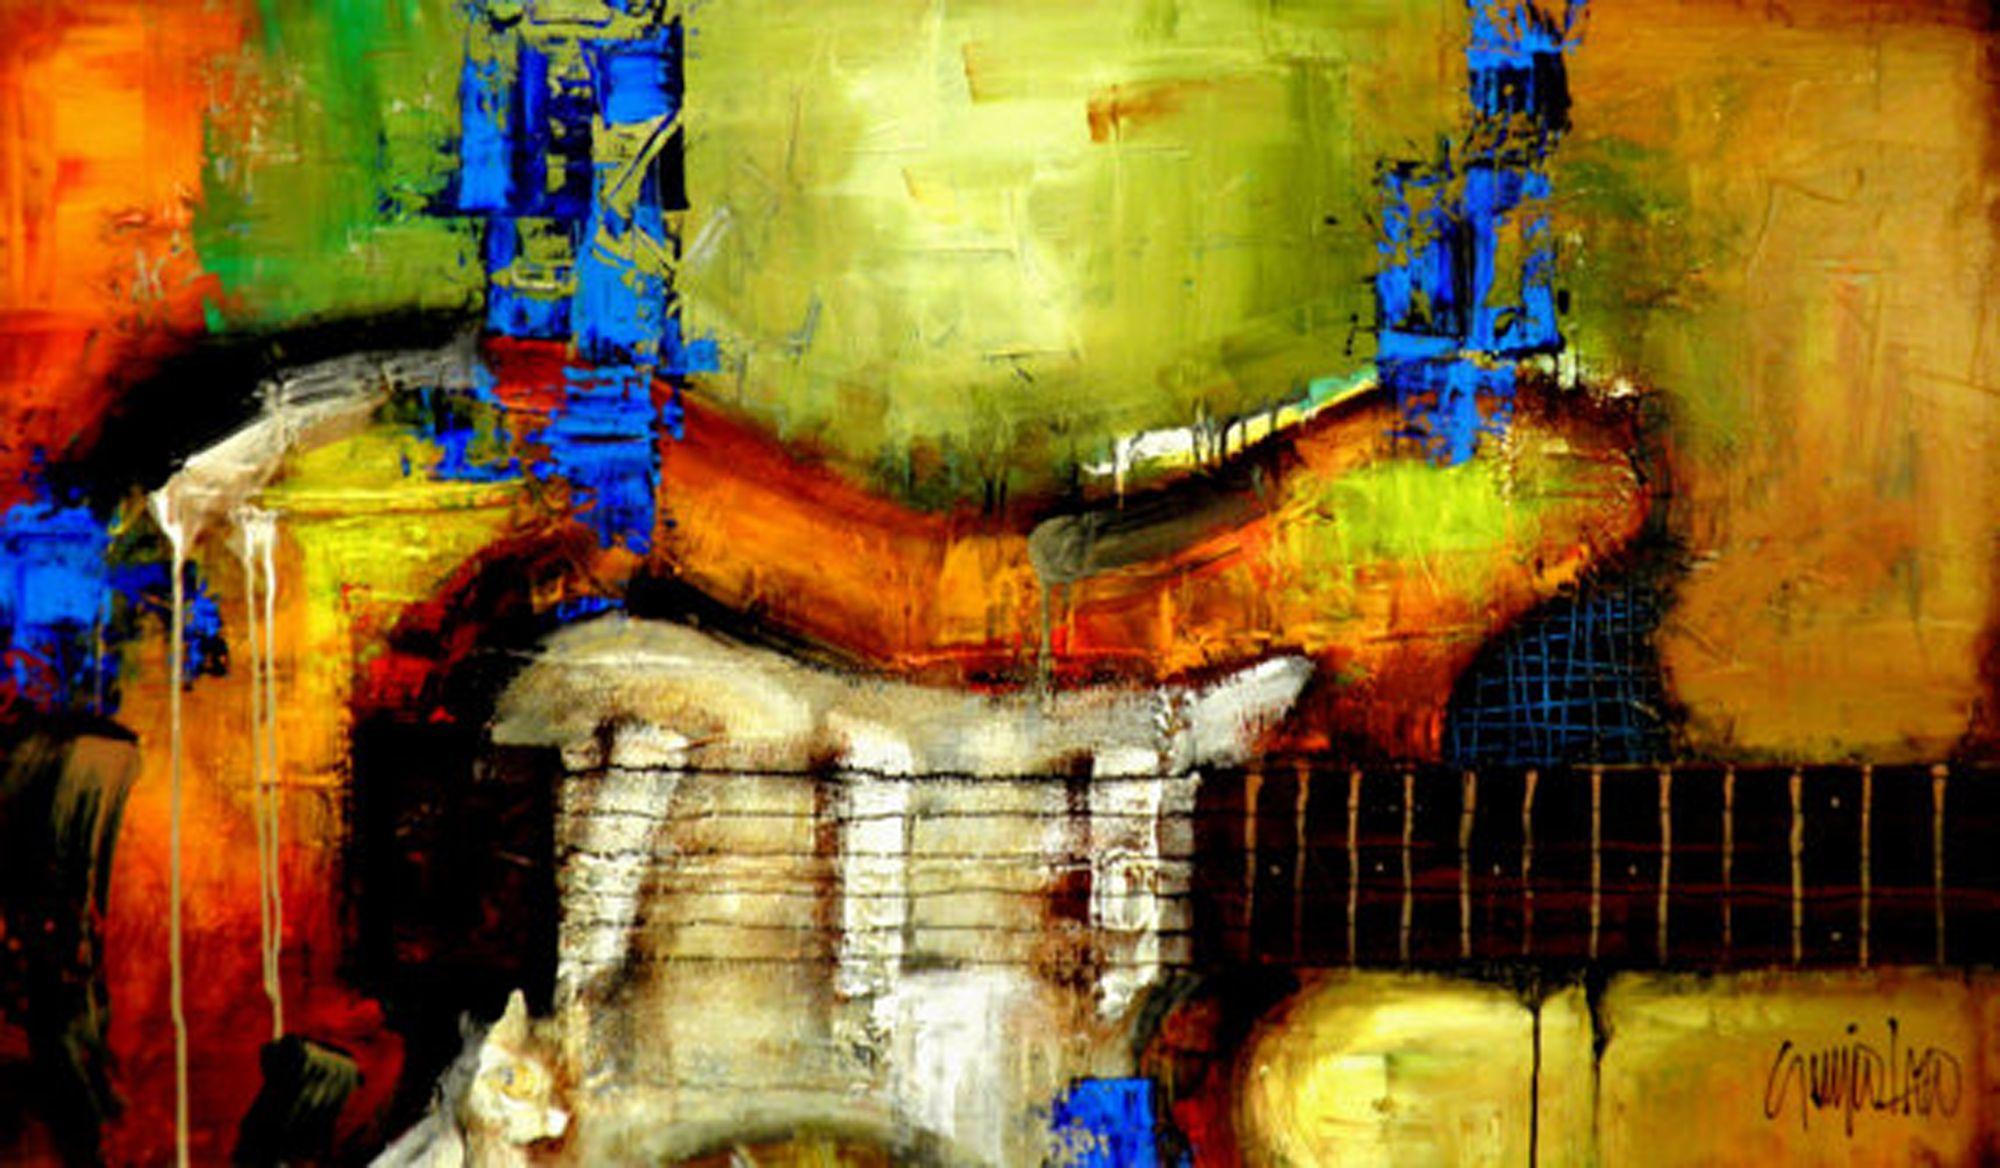 Sergio Lazo Abstract Painting - Without Words, Painting, Acrylic on Canvas